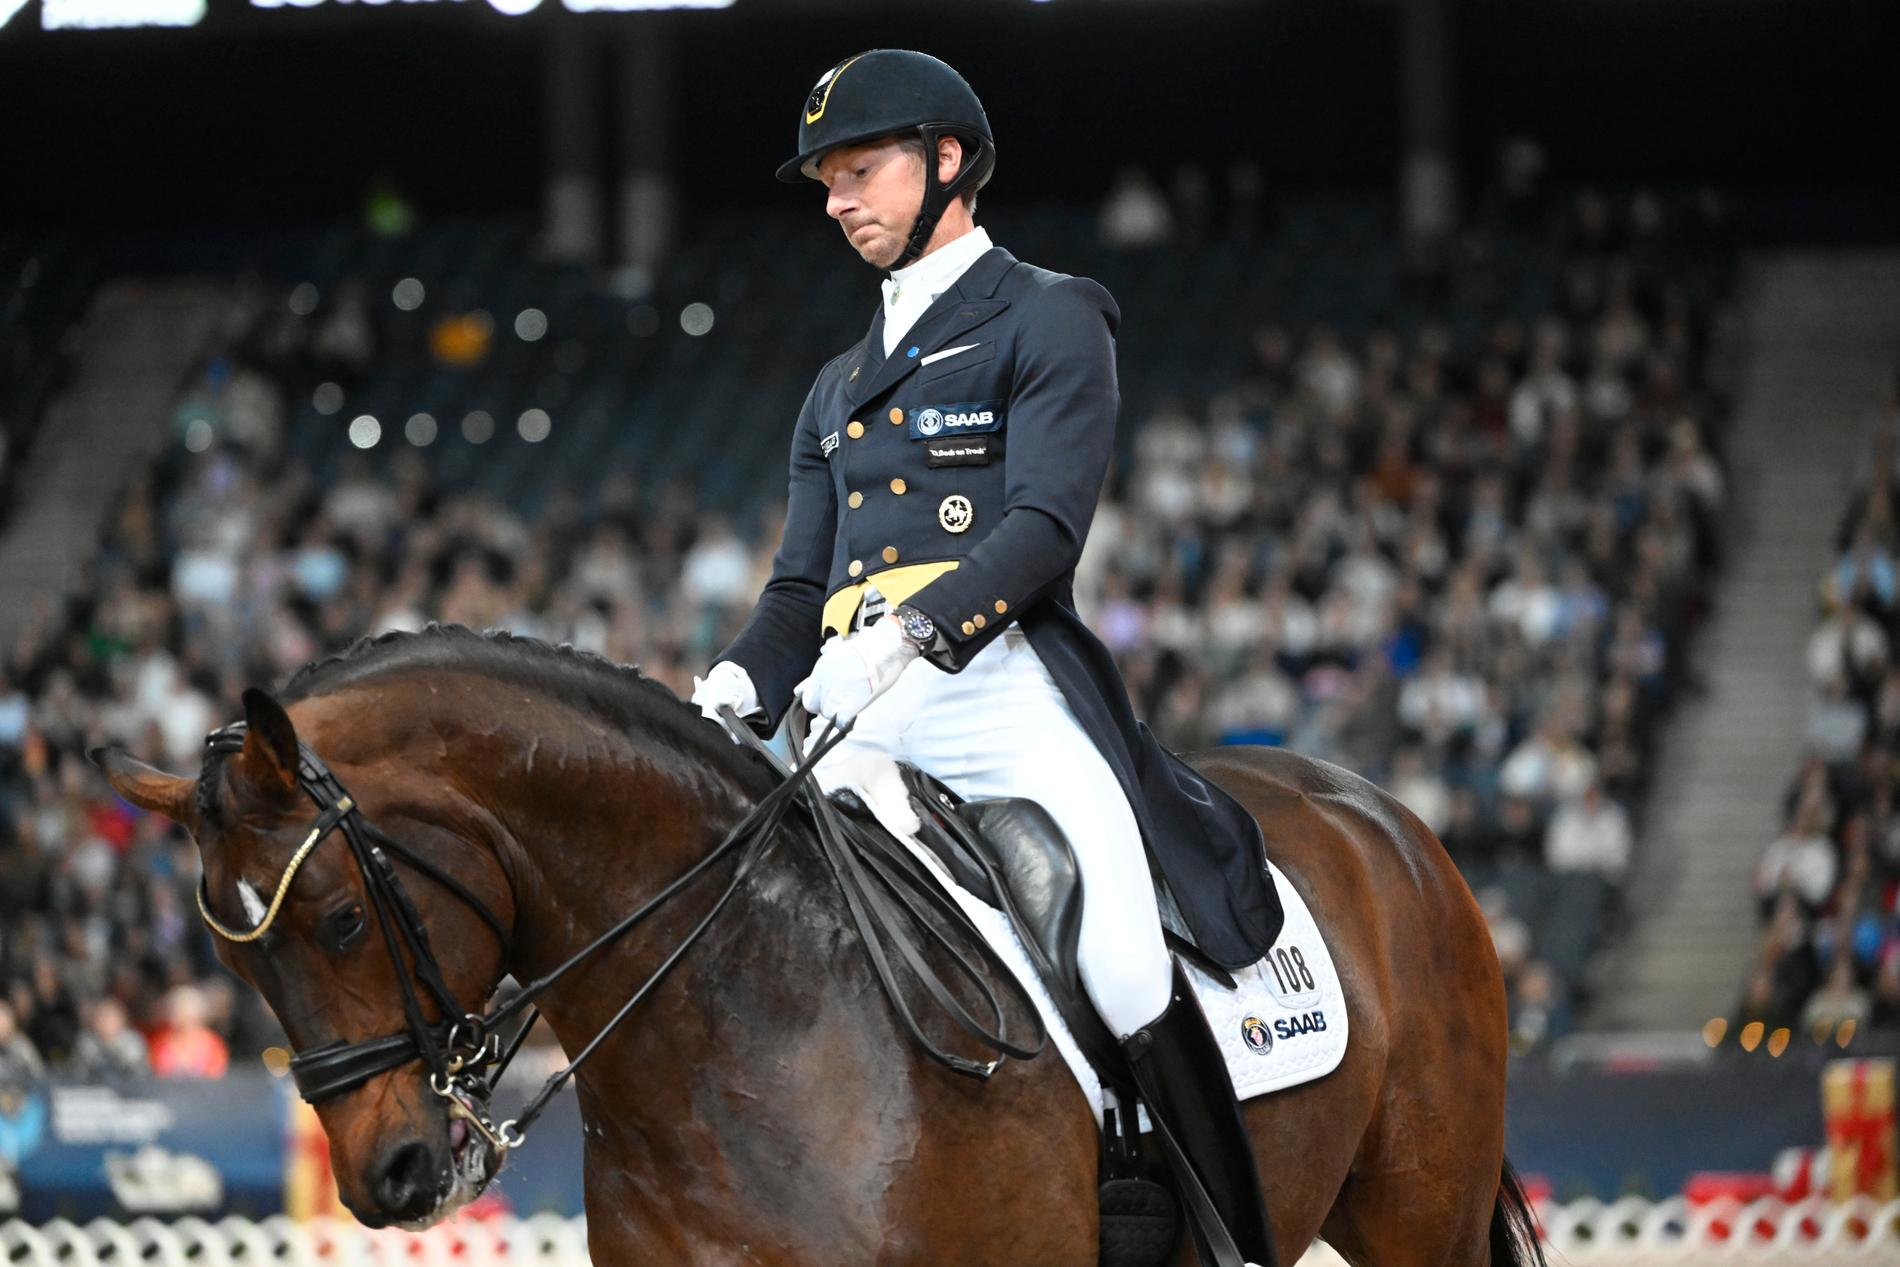 Patrik Kittel when he competed at Friends Arena.